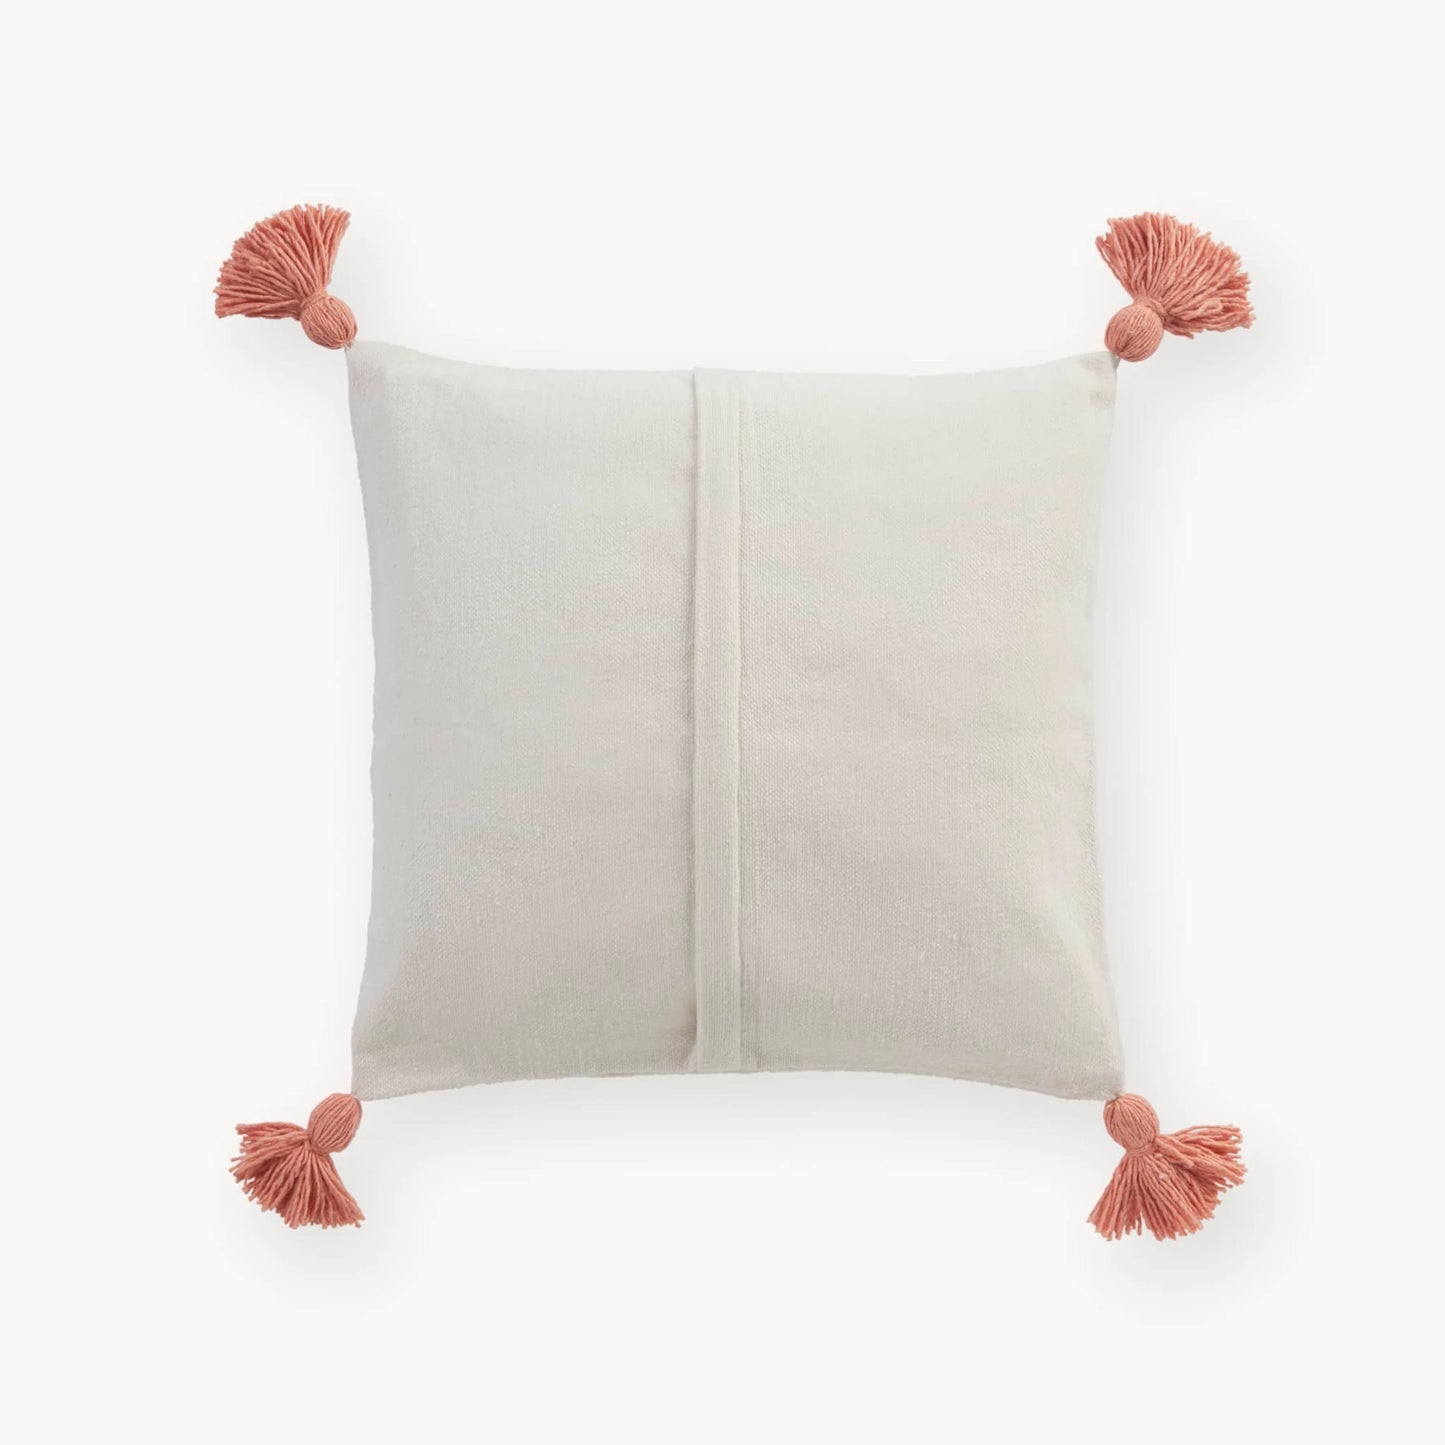 Moroccan Pillow - Coral Pom